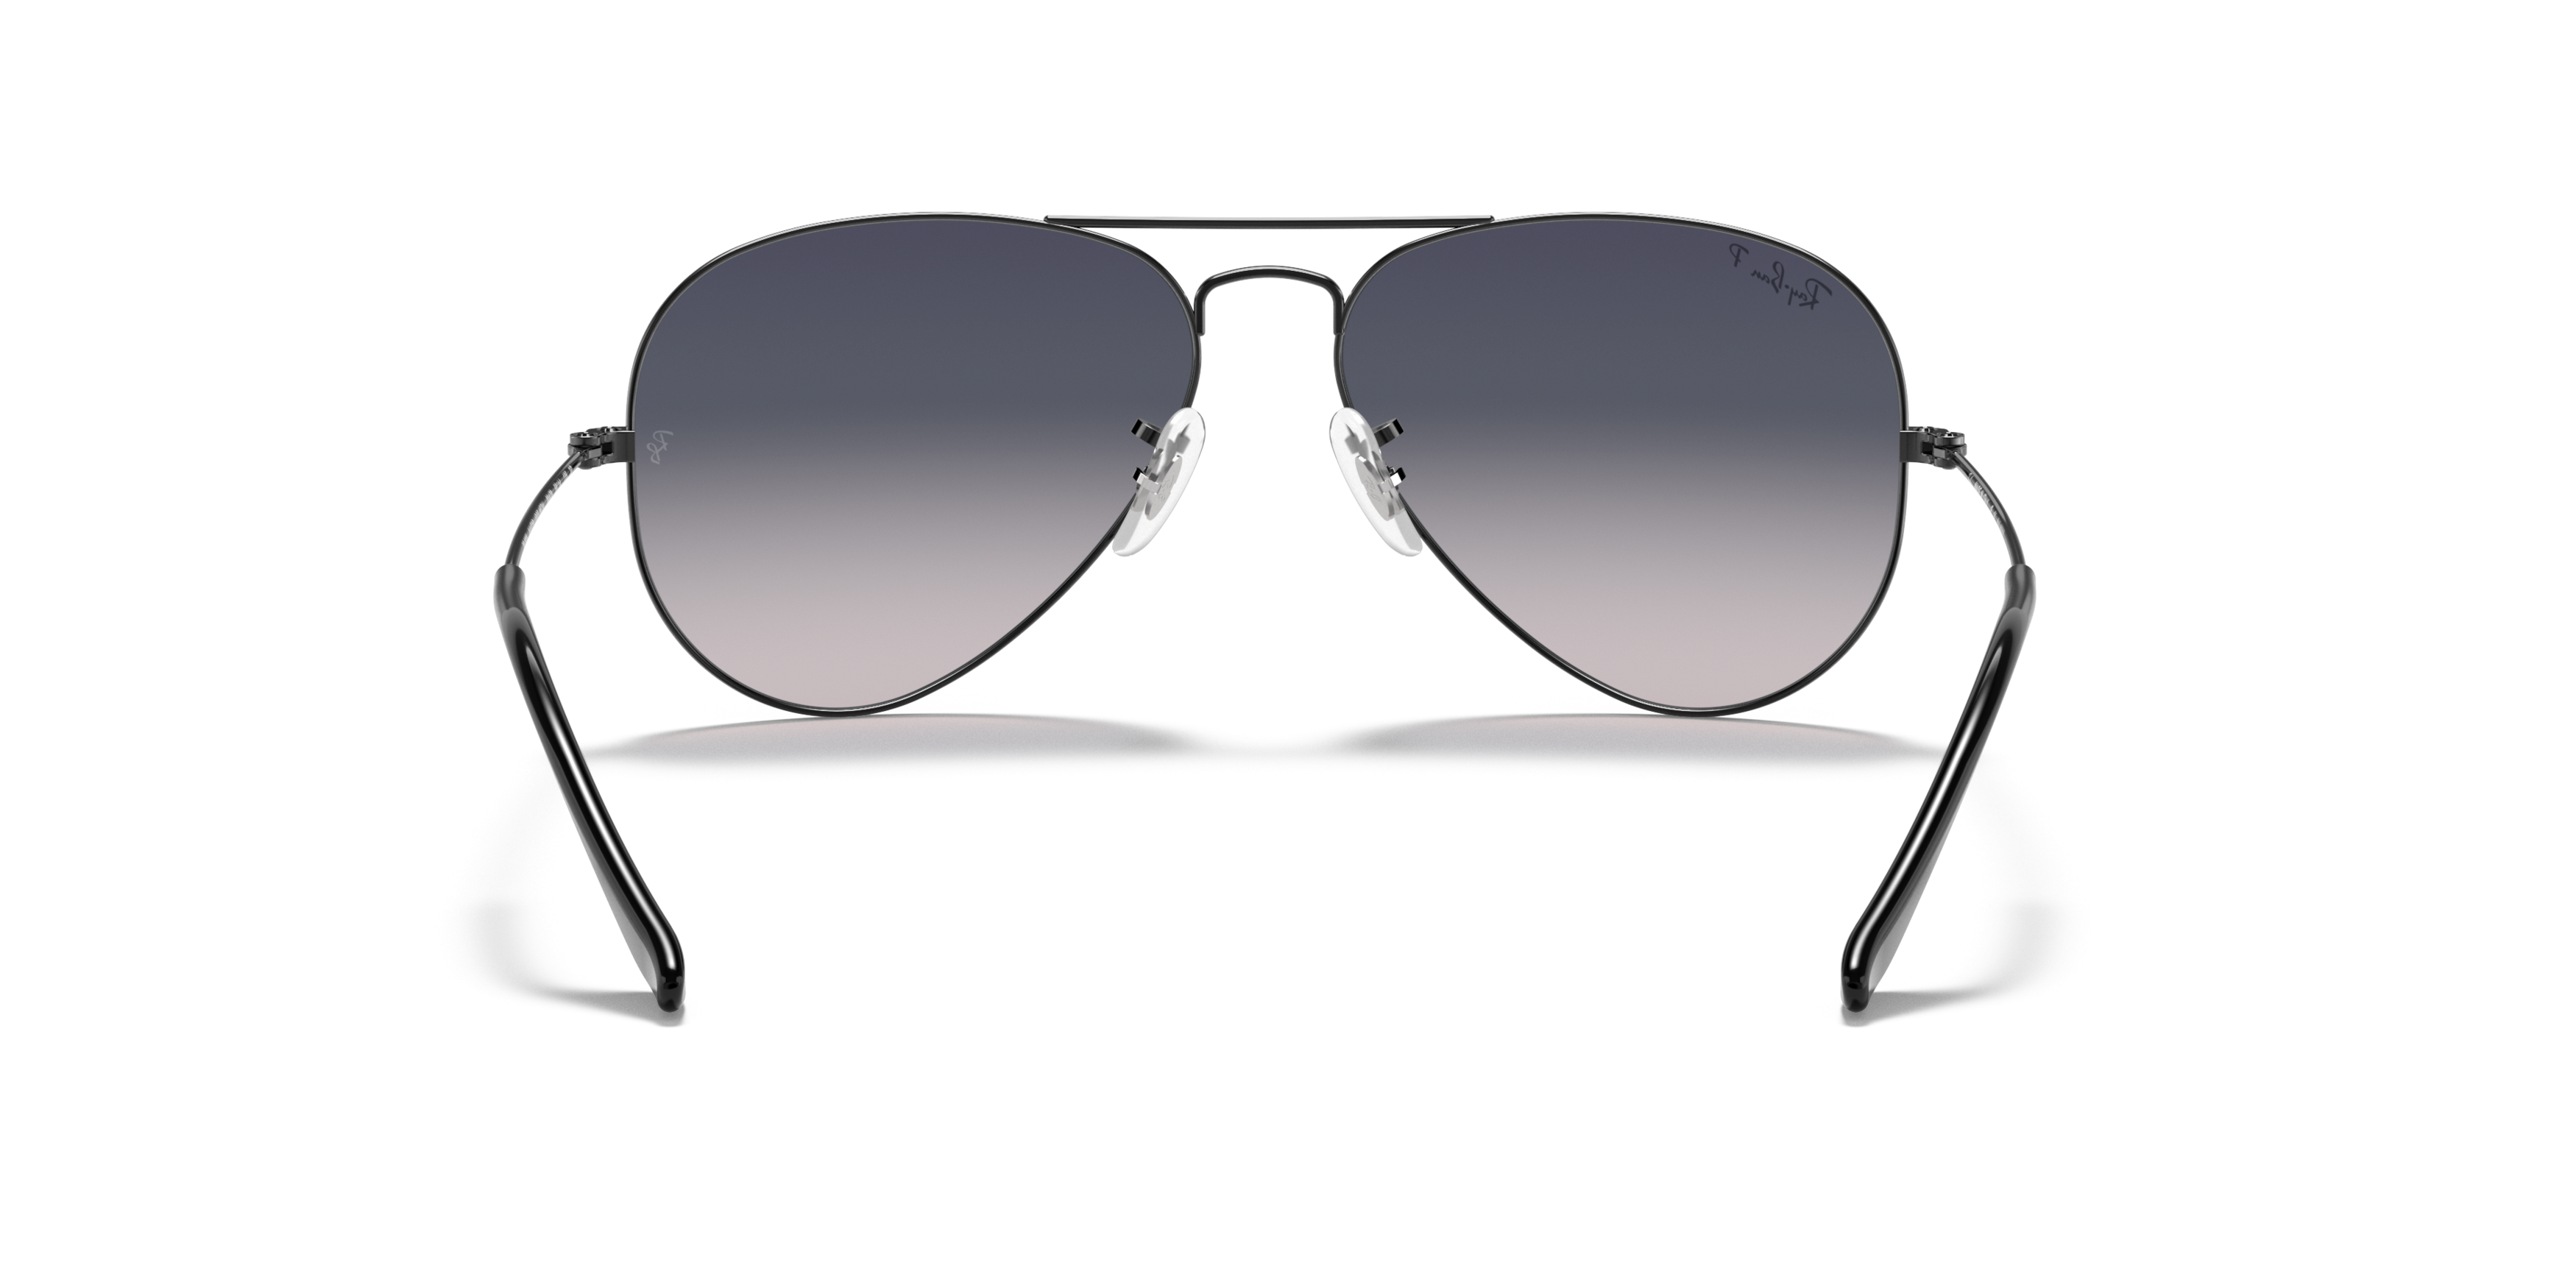 [products.image.detail02] Ray-Ban Aviator RB3025 004/78